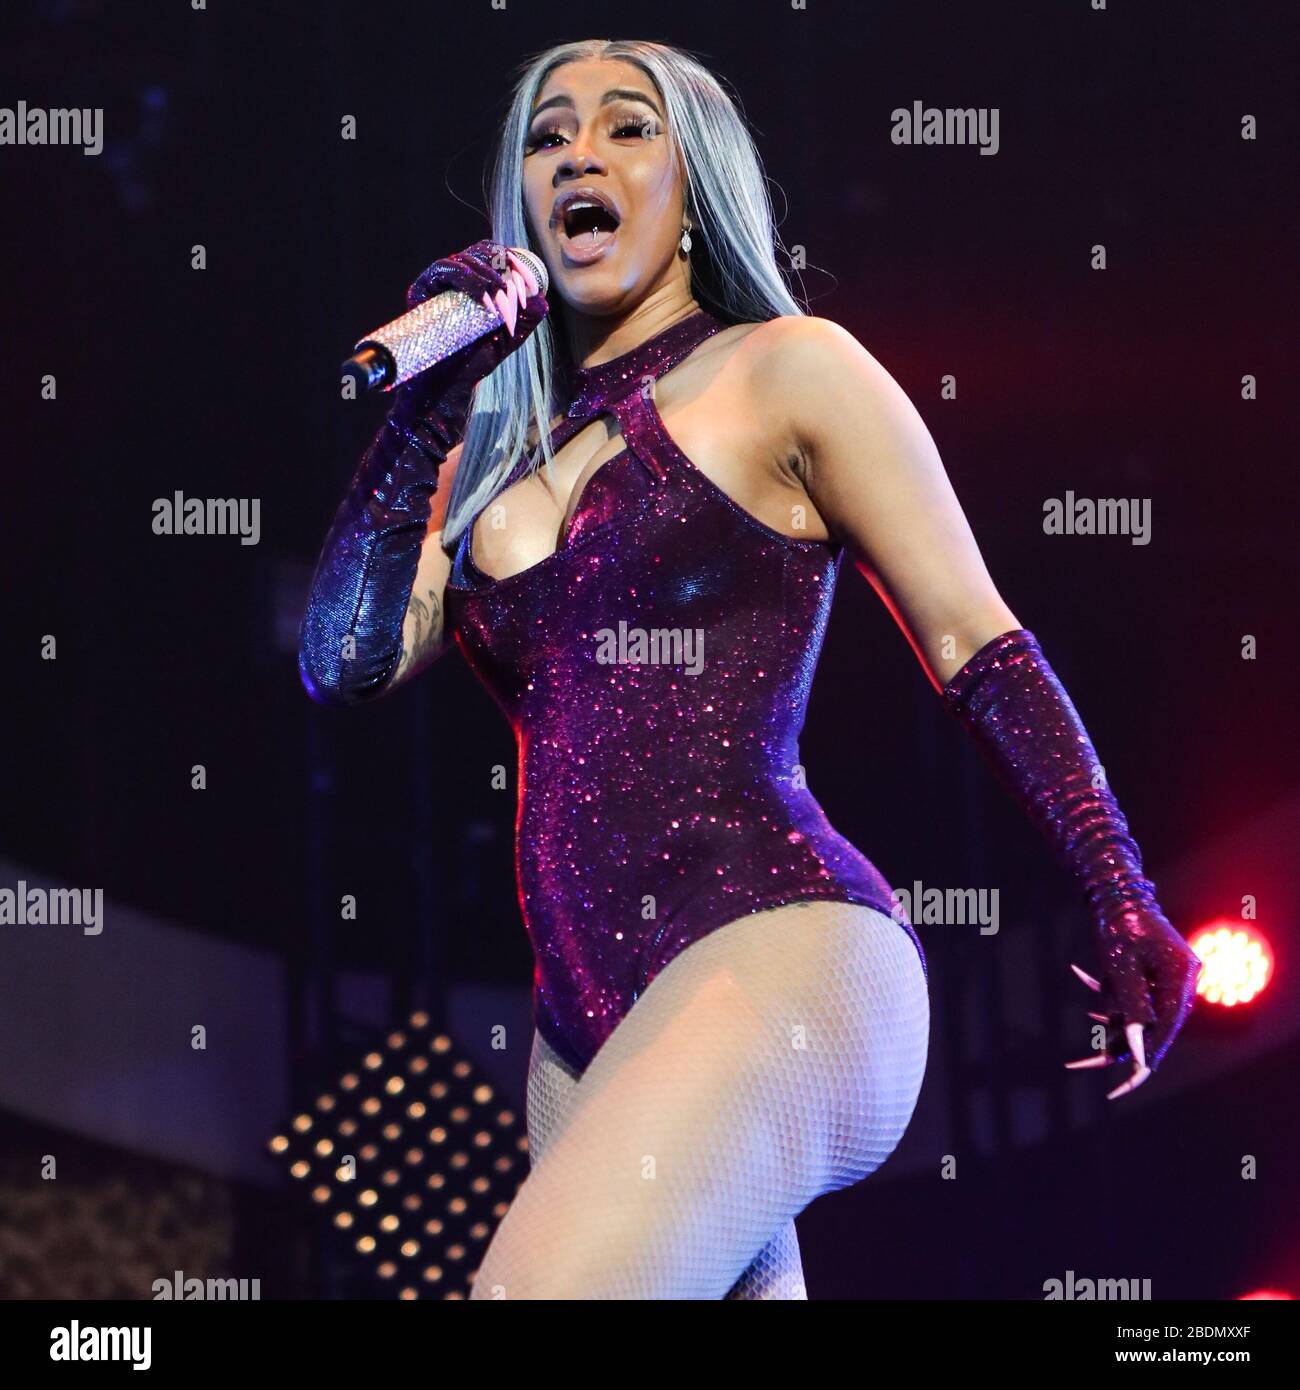 (FILE) Cardi B And Fashion Nova Are Giving Away $1,000 Per Hour Amid Coronavirus COVID-19 Pandemic. Fashion Nova and Cardi B are donating $1,000 every hour for the next 42 days until they've given away $1 million to those affected by the coronavirus pandemic. LOS ANGELES, CALIFORNIA, USA - JUNE 22: Rapper Cardi B (Belcalis Marlenis Almanzar) performs at the 7th Annual BET Experience At L.A. LIVE Presented By Coca-Cola - Day 3 held at Staples Center on June 22, 2019 in Los Angeles, California, United States. (Photo by Xavier Collin/Image Press Agency) Stock Photo